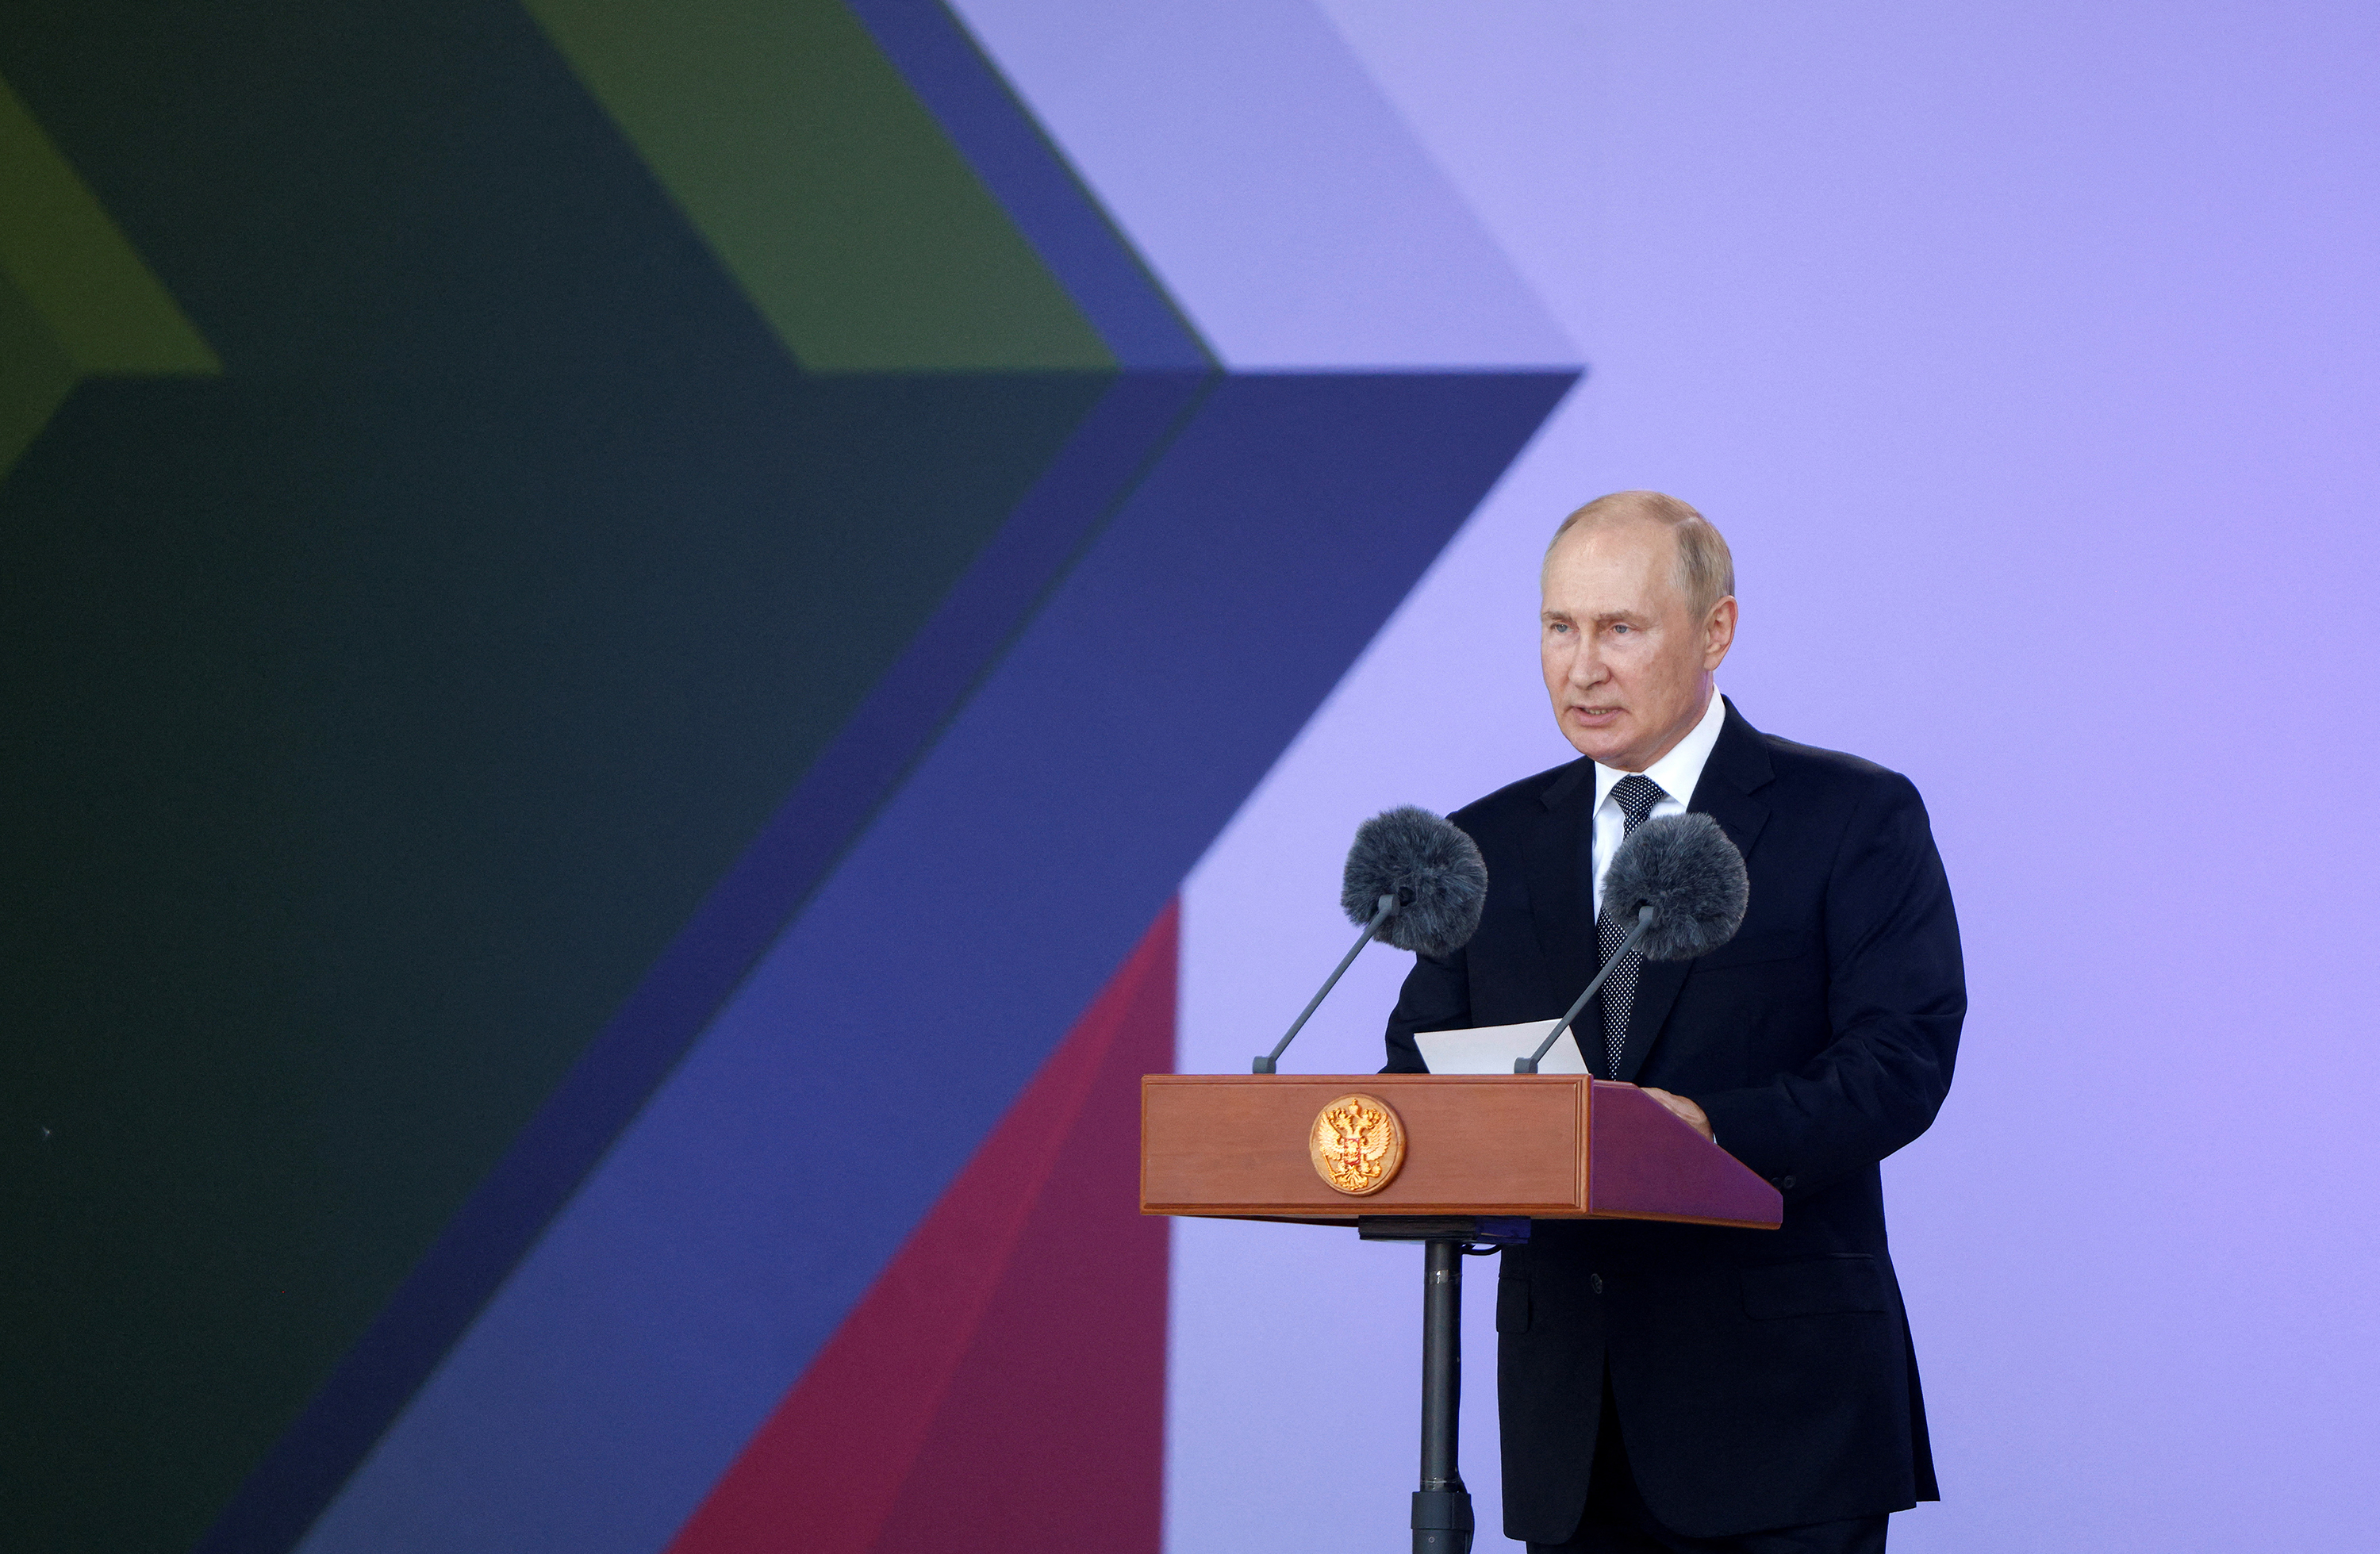 Russian President Vladimir Putin delivers a speech during a ceremony opening in Moscow, Russia on August 15.